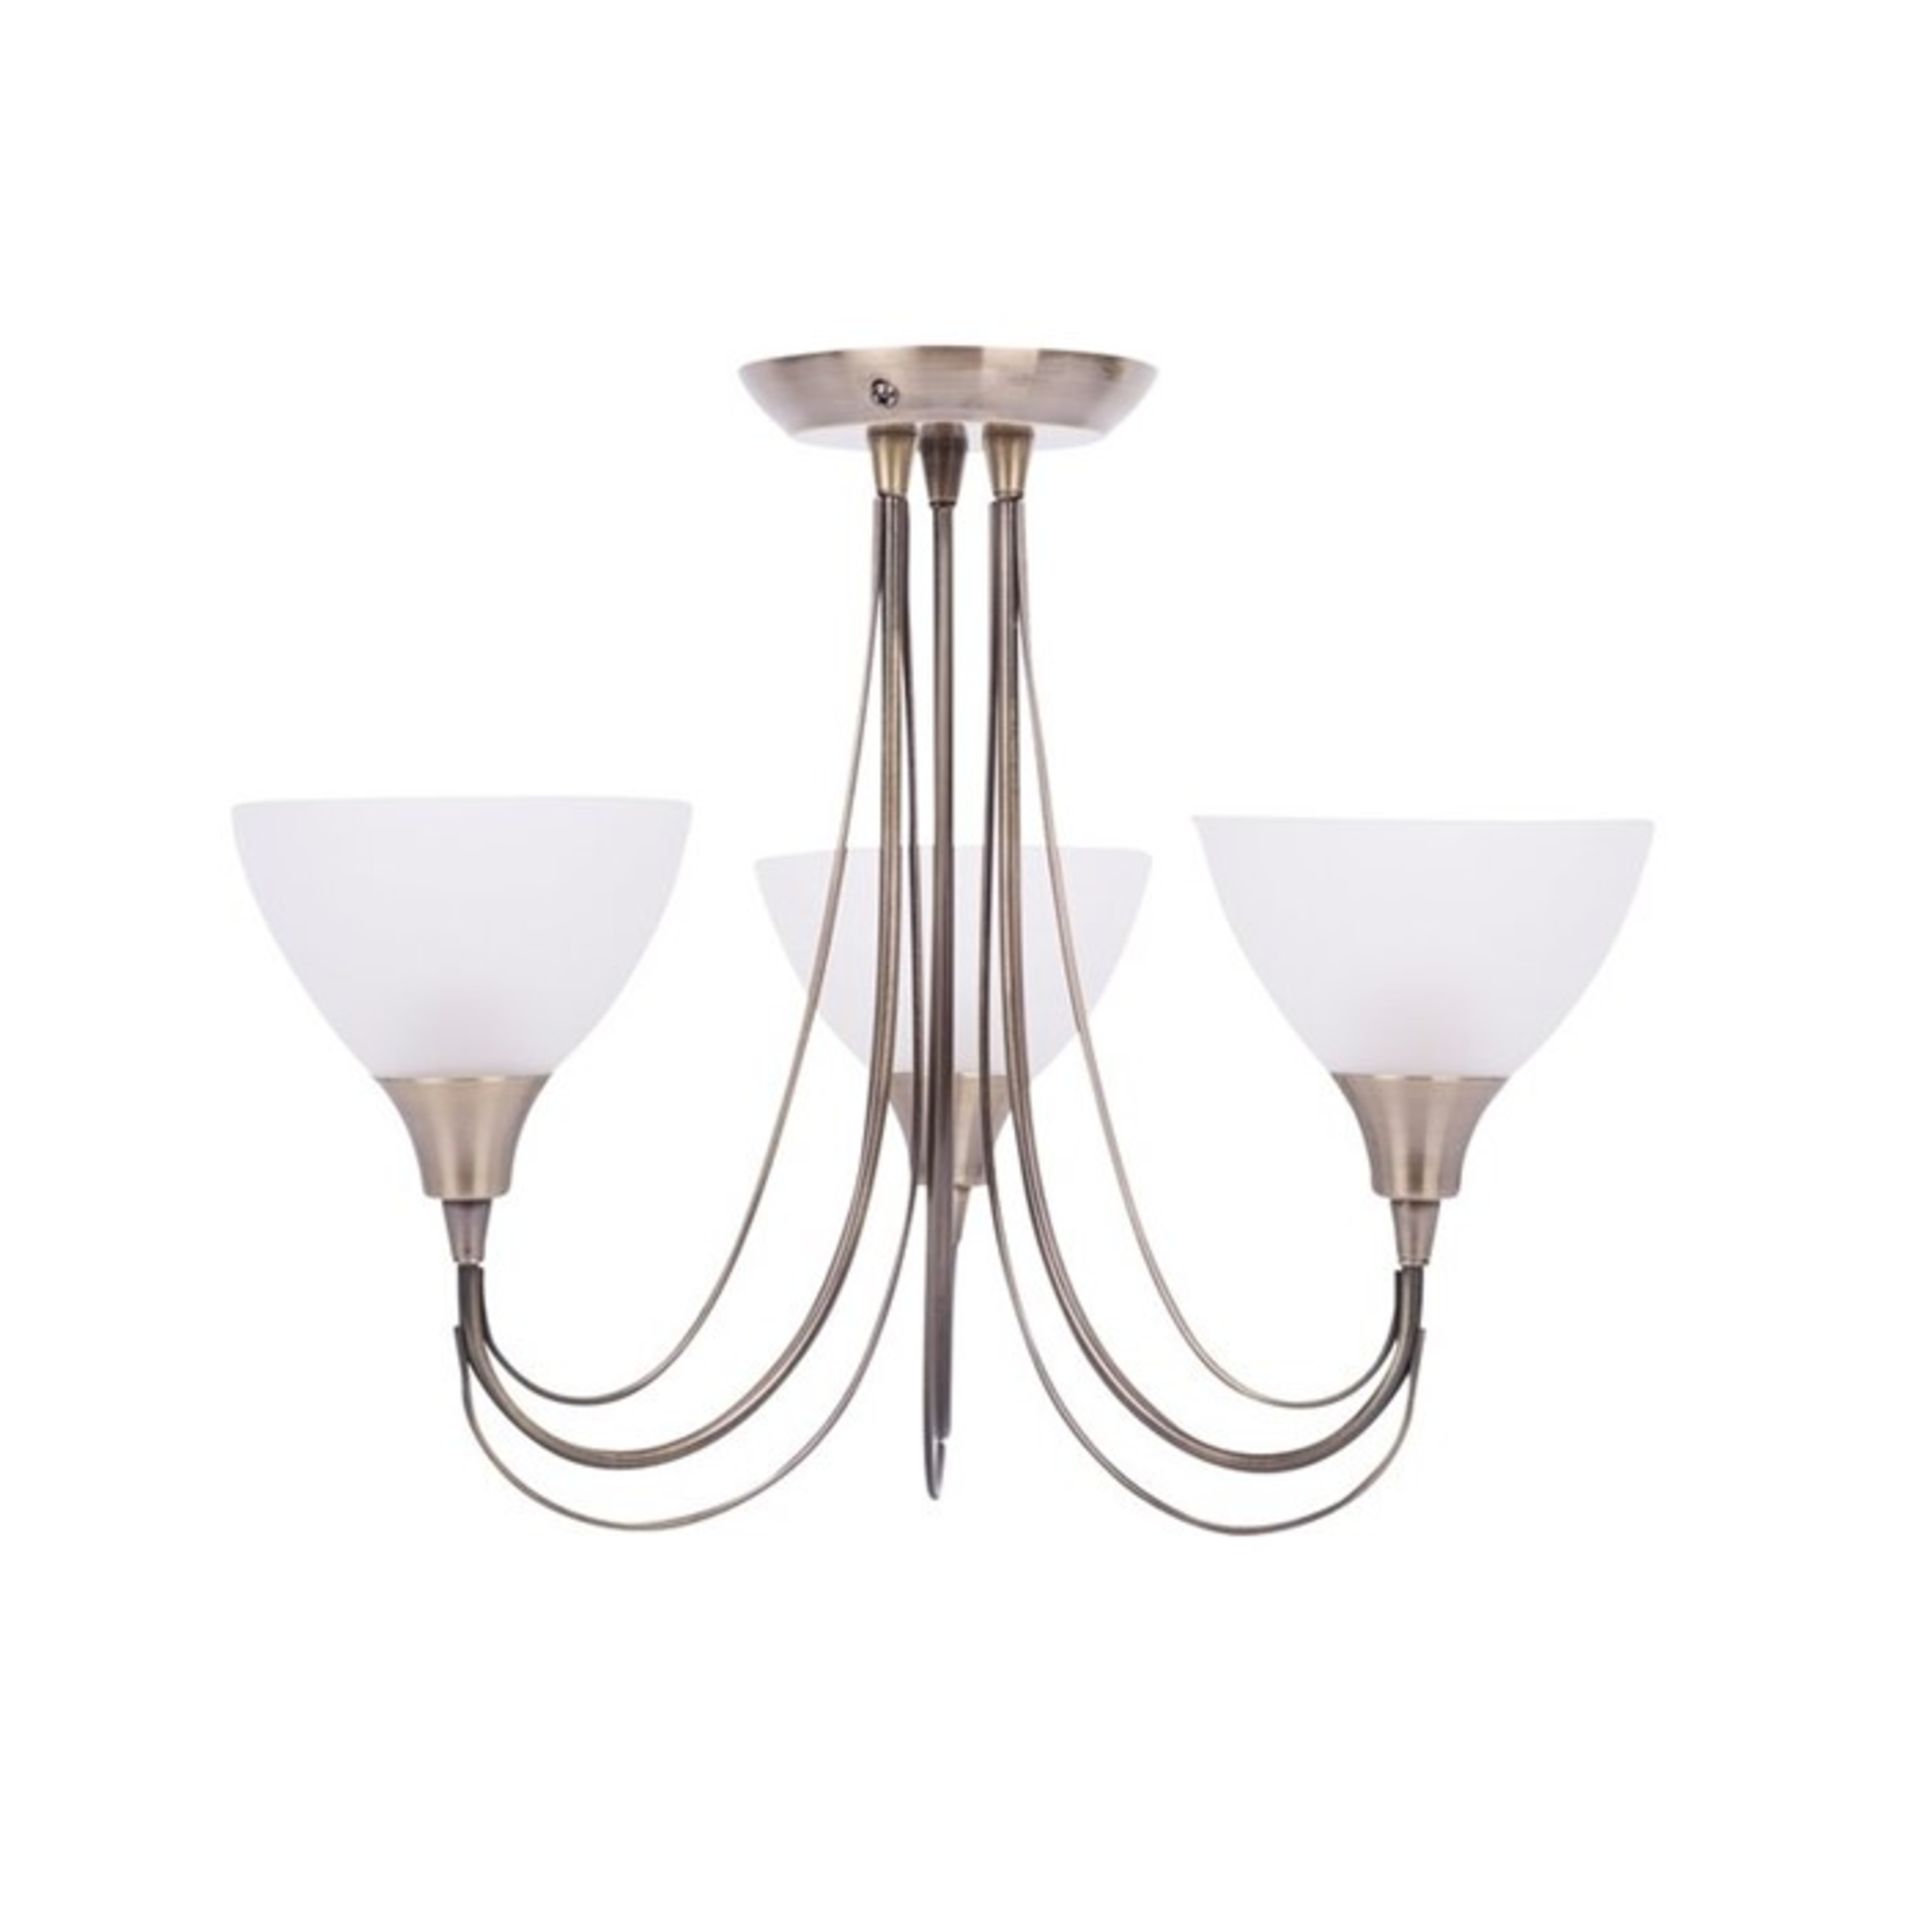 Marlow Home Co. Maryln 3-Light Semi Flush Mount - RRP £33.99 (FTCL1201 - 17096/27) (RETURN)